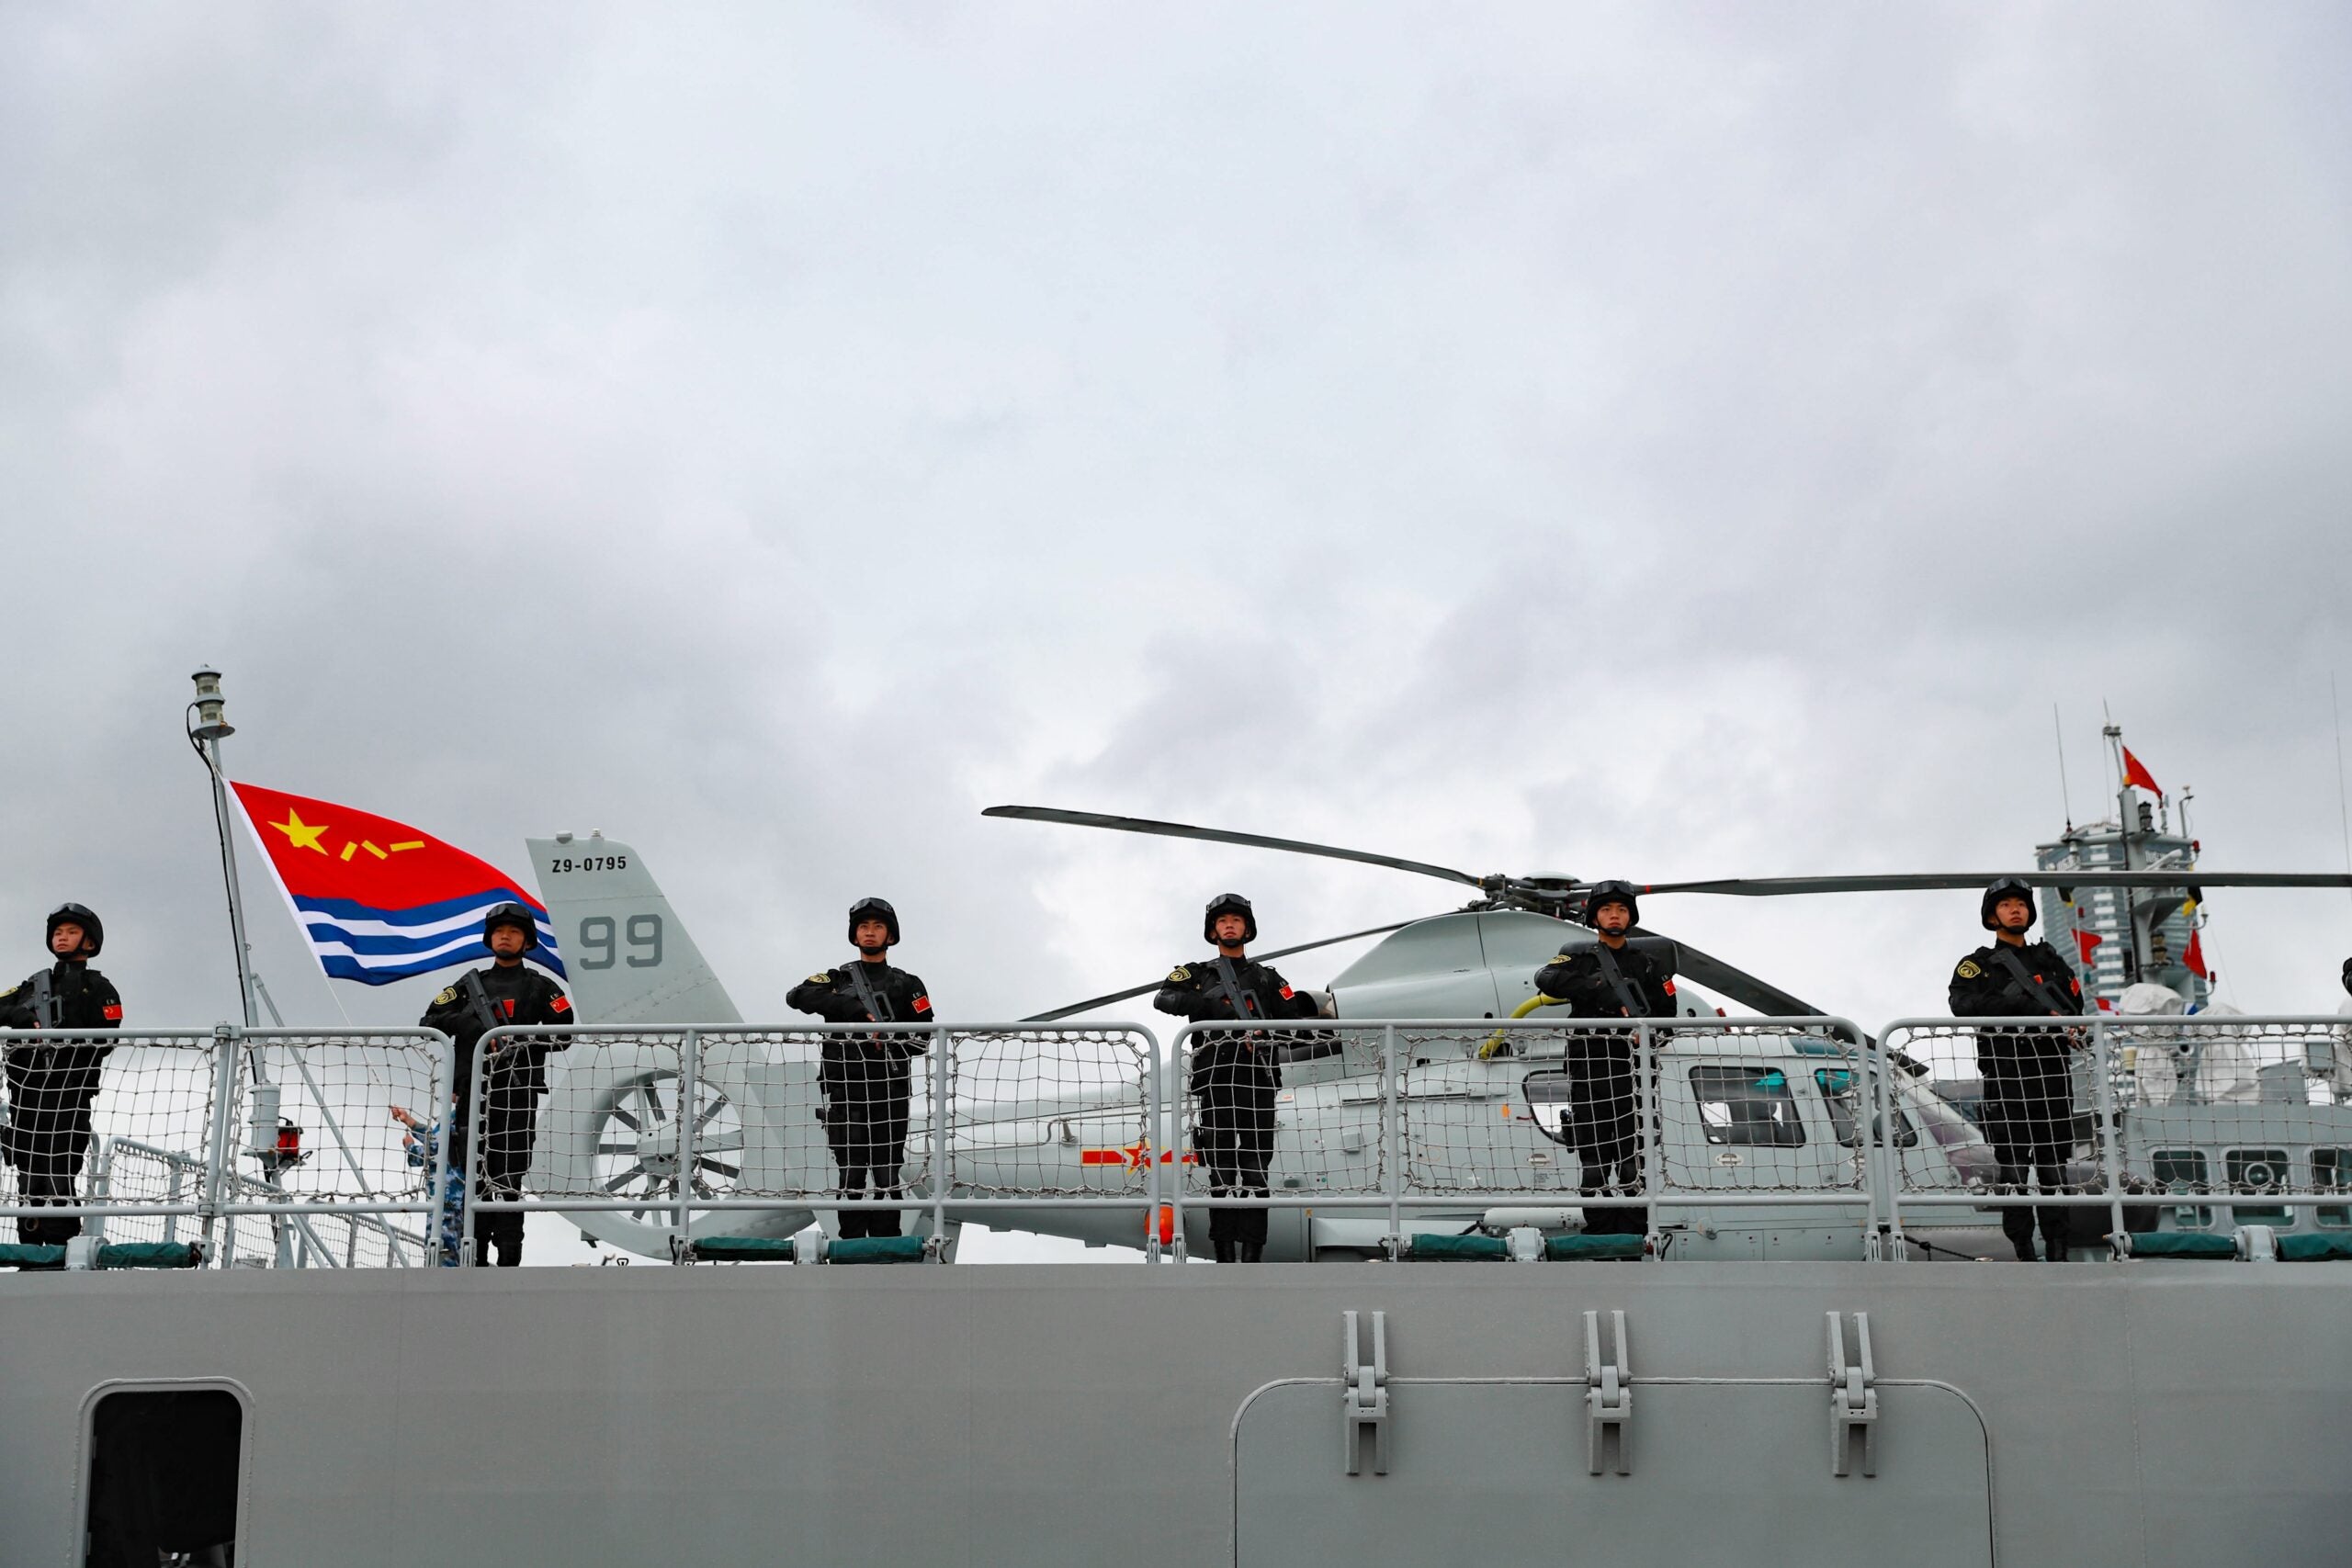 The 39th fleet of the Chinese People's Liberation Army PLA Navy sets out to conduct an escort mission in the Gulf of Aden and the waters off Somalia, at a port in Qingdao, east China's Shandong Province, Sept. 26, 2021. The fleet is composed of the guided-missile destroyer Urumqi, the missile frigate Yantai, and the supply ship Taihu, with dozens of special-operations soldiers and two helicopters on board.The PLA Navy began conducting escort missions in the Gulf of Aden and the waters off Somalia in December 2008. (Photo by Liu Zaiyao/Xinhua via Getty Images)